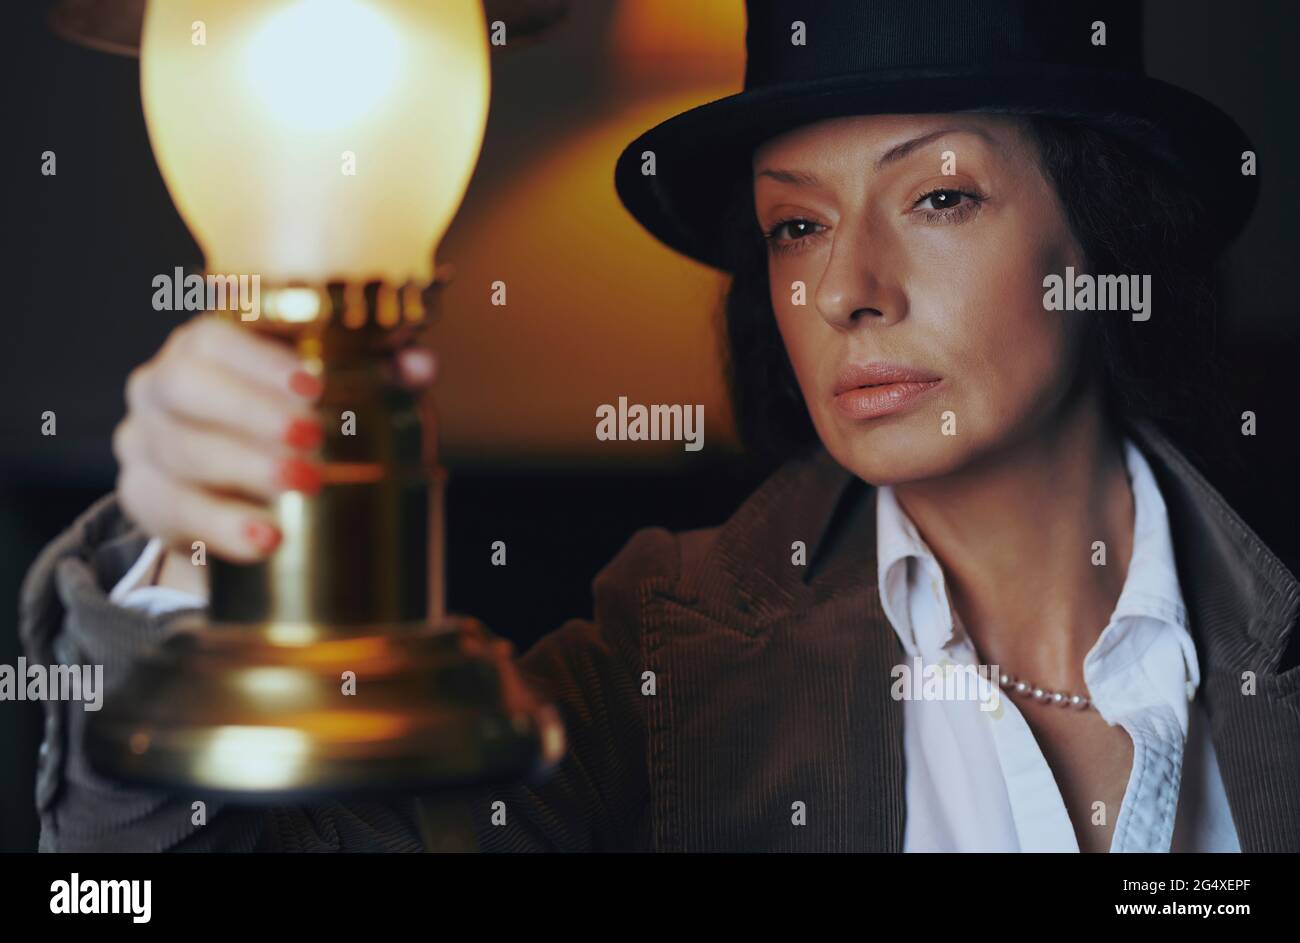 Mature woman holding old-fashioned electric lamp Stock Photo